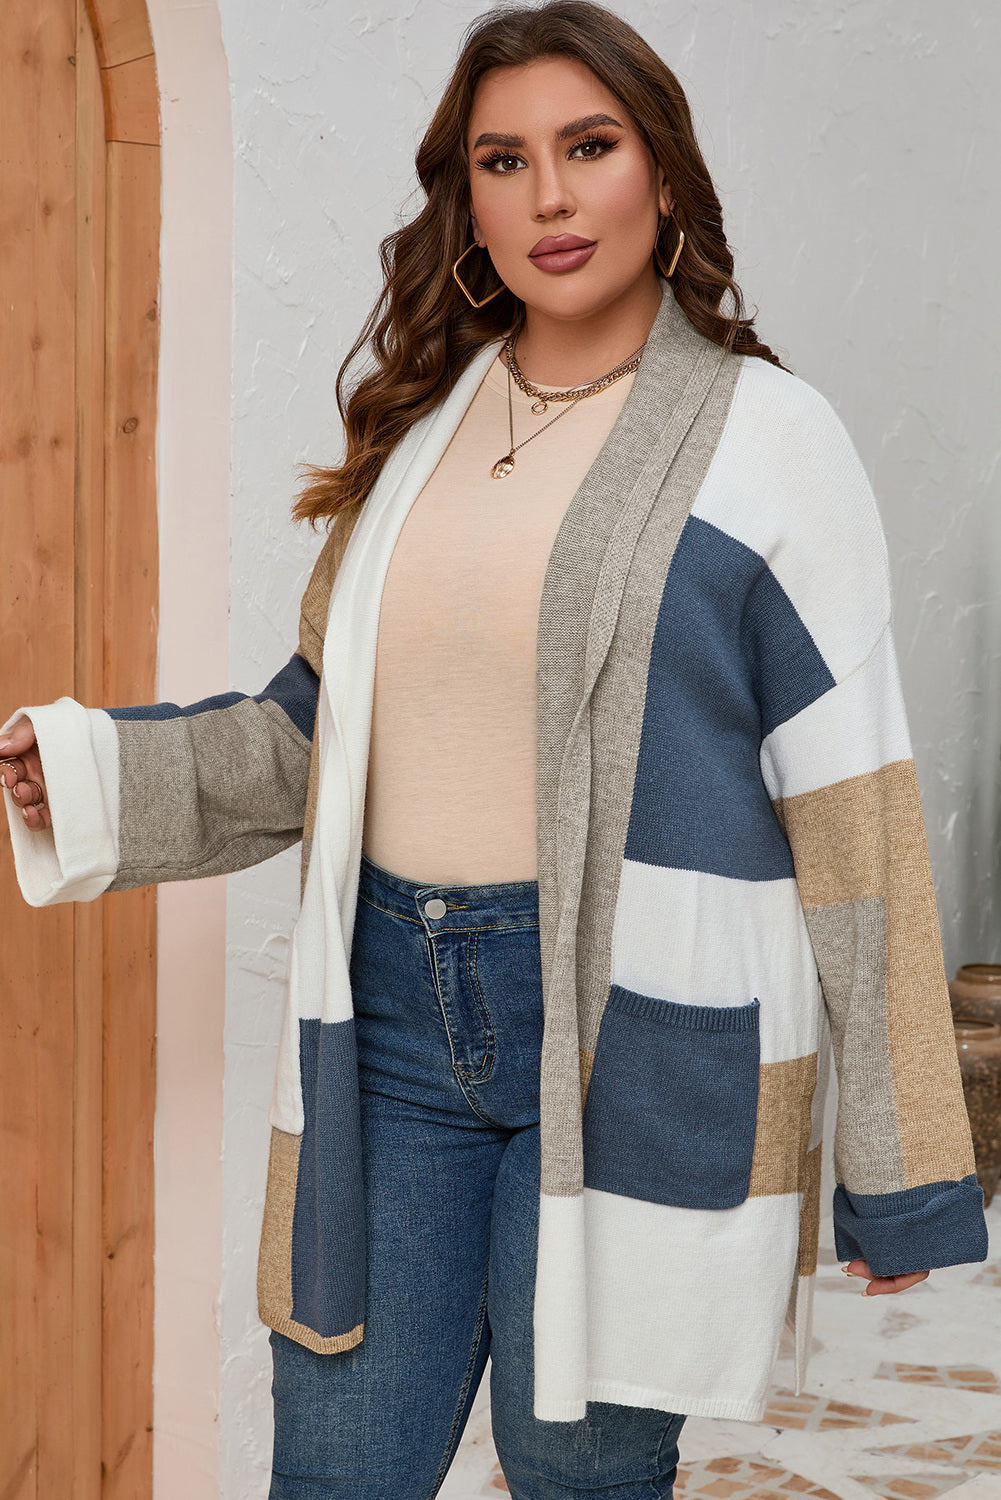 Plus Size Color Block Long Sleeve Cardigan - Multicolor / 1XL - Women’s Clothing & Accessories - Shirts & Tops - 1